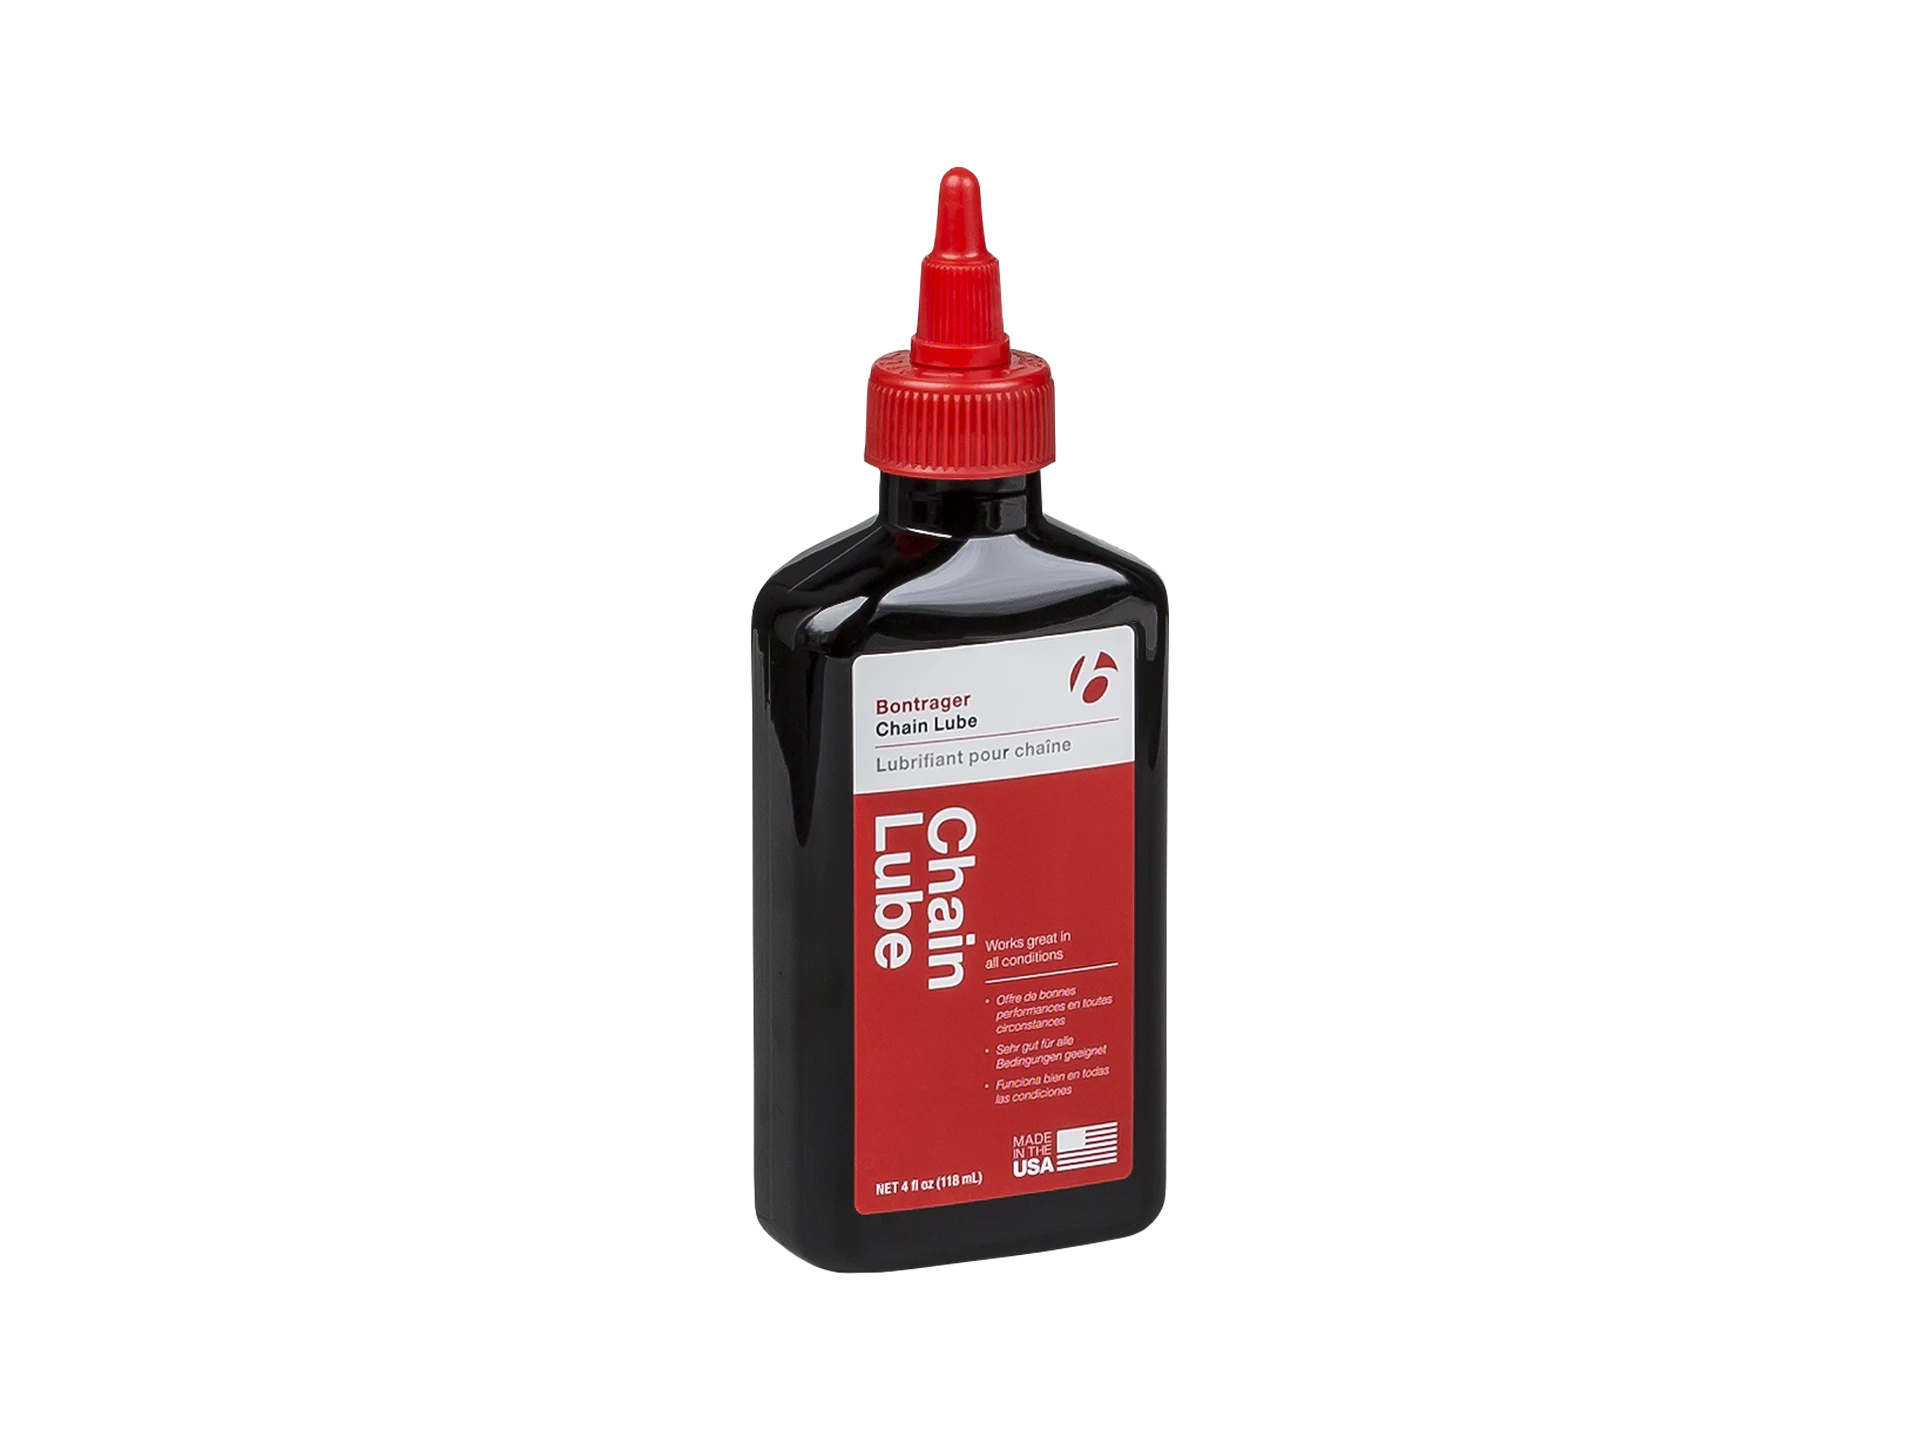 B0NTRAGER BONTRAGER CHAIN LUBE